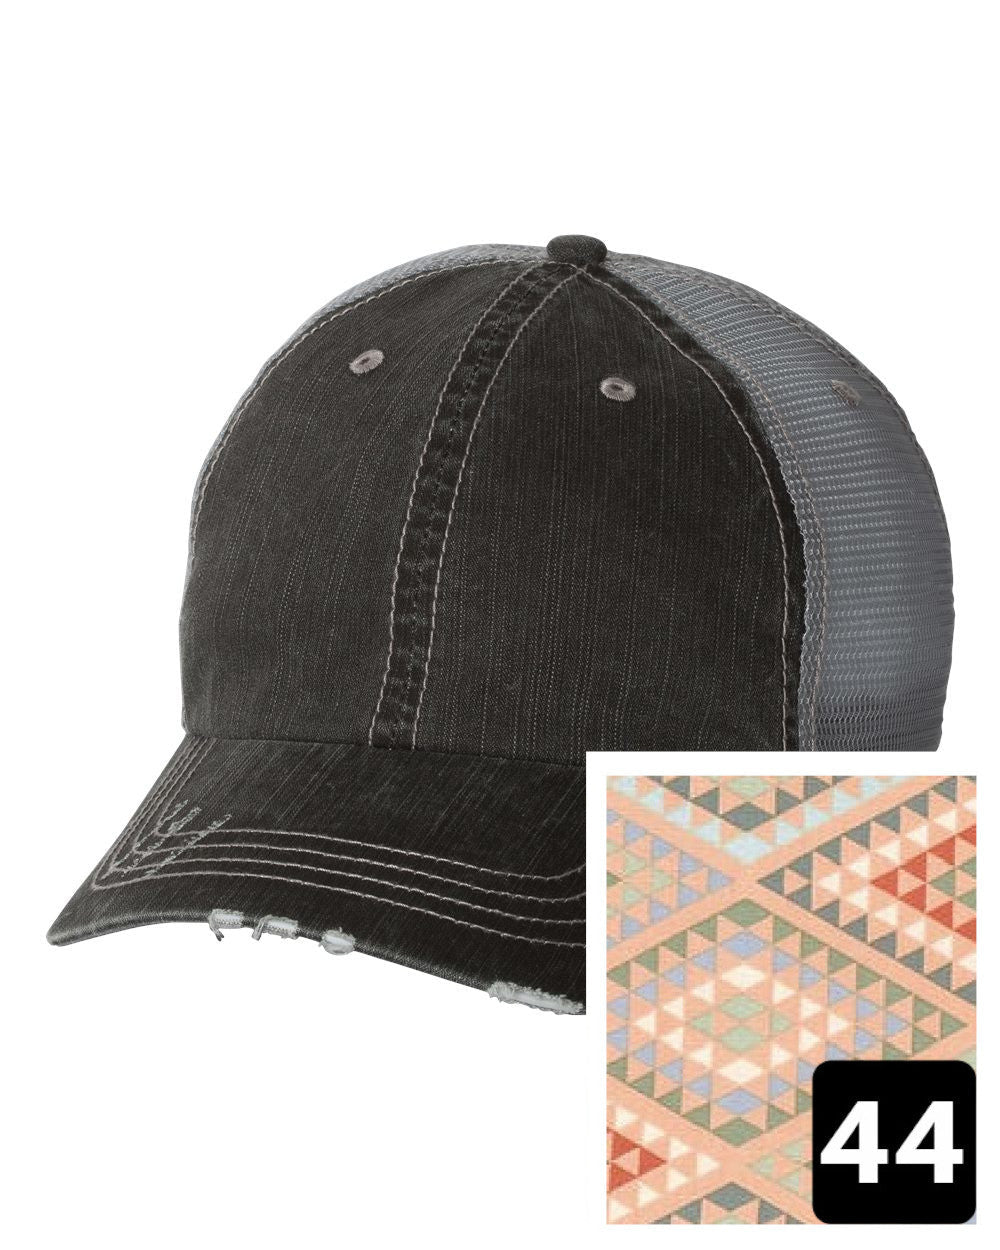 gray distressed trucker hat with navy coral and white chevron fabric state of Indiana